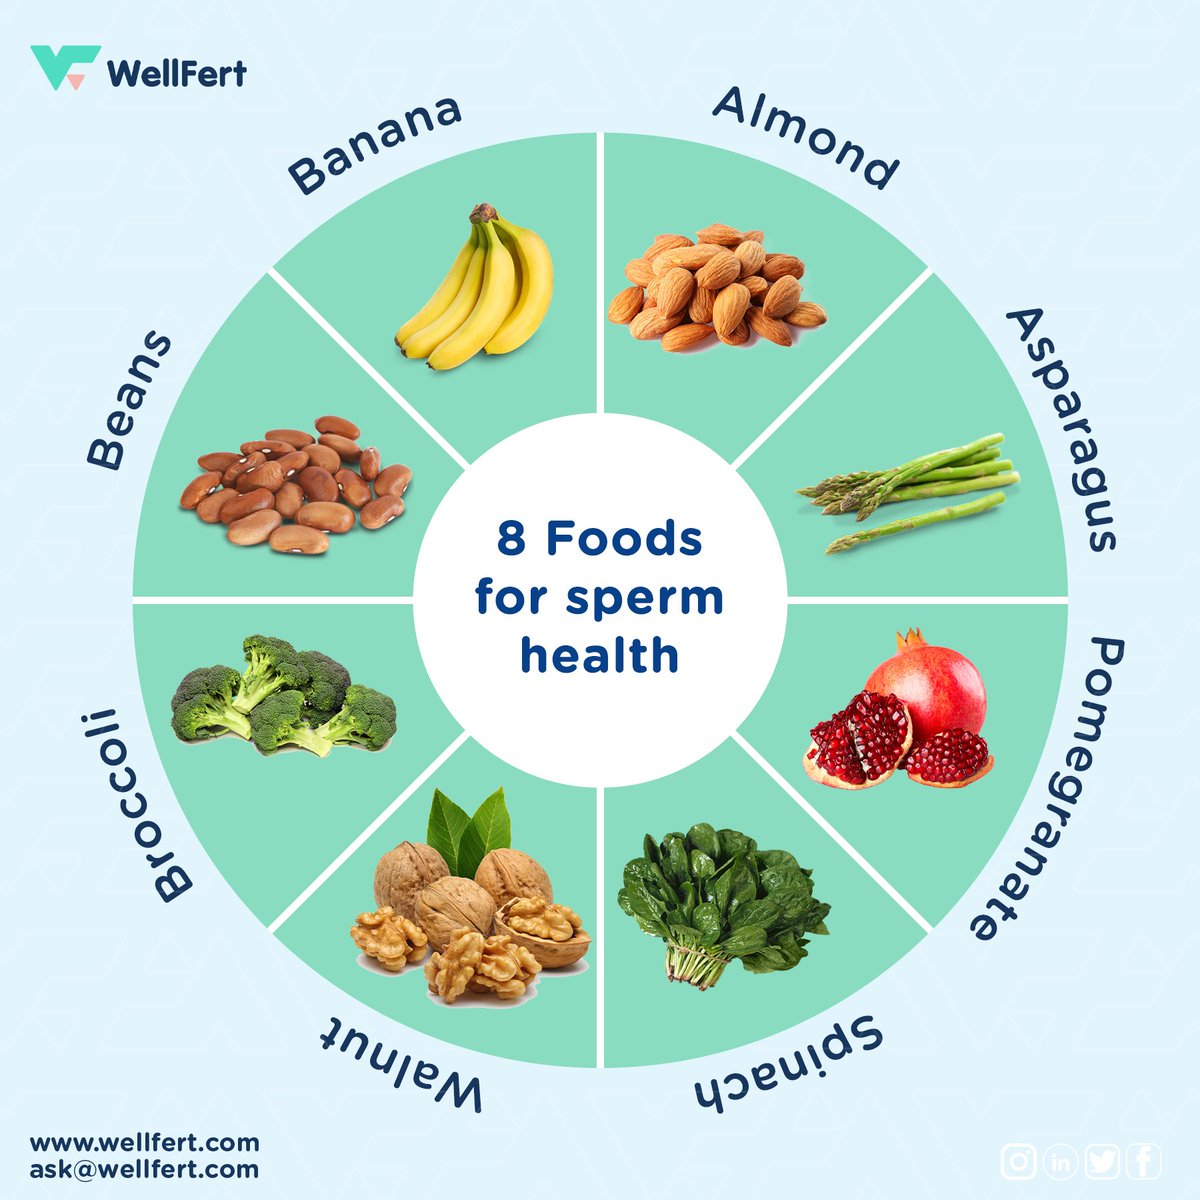 For the men 👨👨‍🦱
.
.
.
.
.
.
.
.
Don't forget to SAVE, LIKE and RETWEET ❤️❤️
#hormonalimbalance #fertilitydetox #ttc #eathealthy #infertilityawareness #miscarriage #fertilityjourney #health #sperm #infertility #fertility #wellfert #wellness #wfcommunity #explorepage #ownyourstory